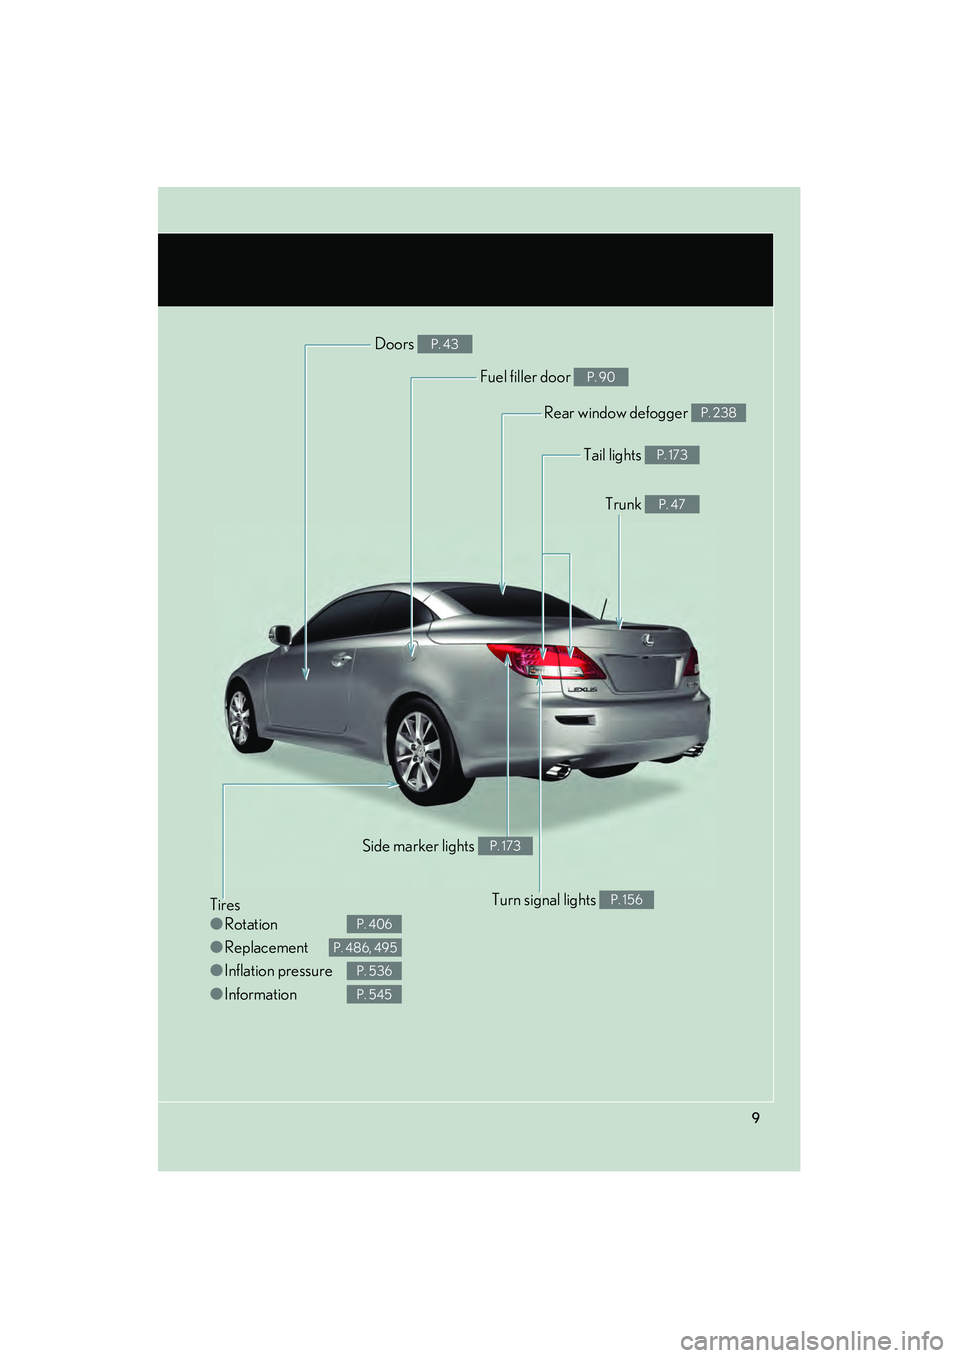 Lexus IS250C 2010  Owners Manual 10_IS250C/350C_U
9
Tires
●Rotation
● Replacement
● Inflation pressure
● Information
P. 406
P. 486, 495
P. 536
P. 545
Tail lights P. 173
Trunk P. 47
Rear window defogger P. 238
Doors P. 43
Fuel